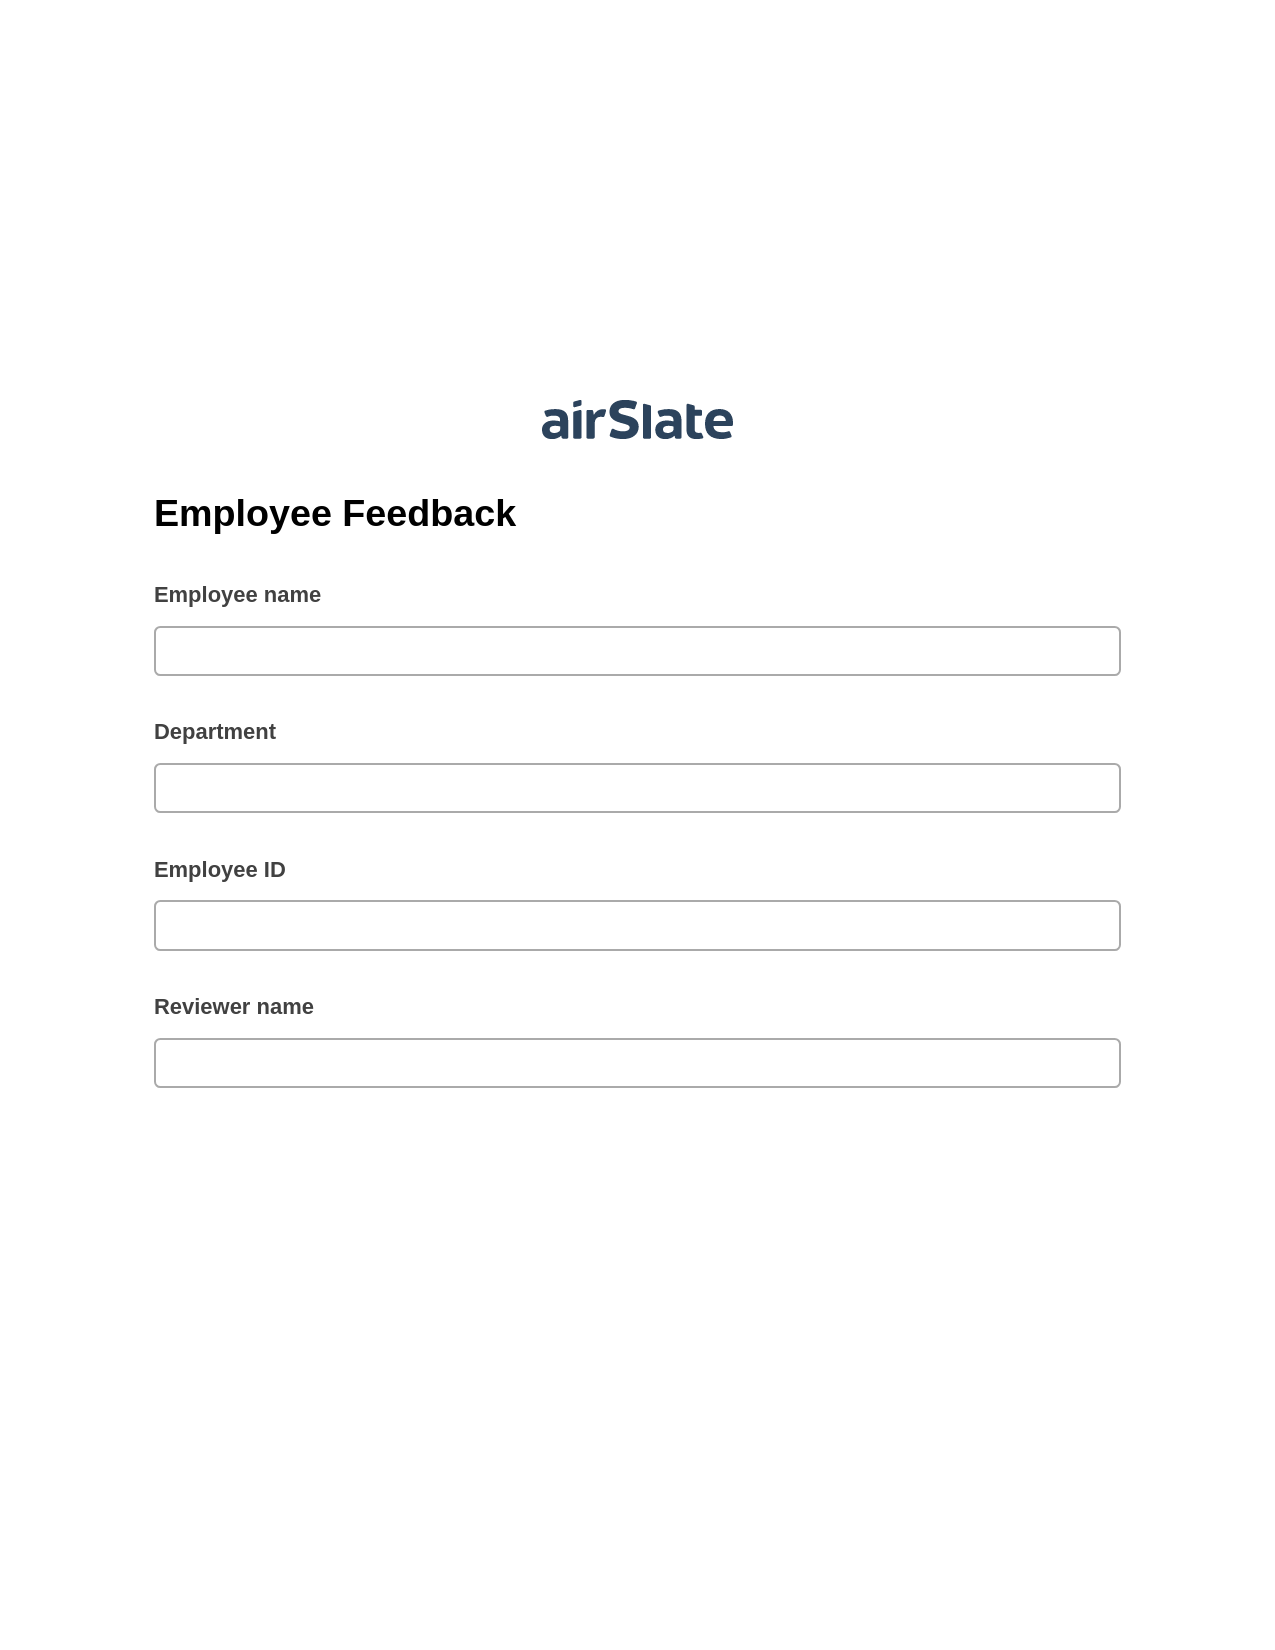 Employee Feedback Pre-fill from NetSuite Records Bot, Invoke Salesforce Process Bot, Export to Formstack Documents Bot